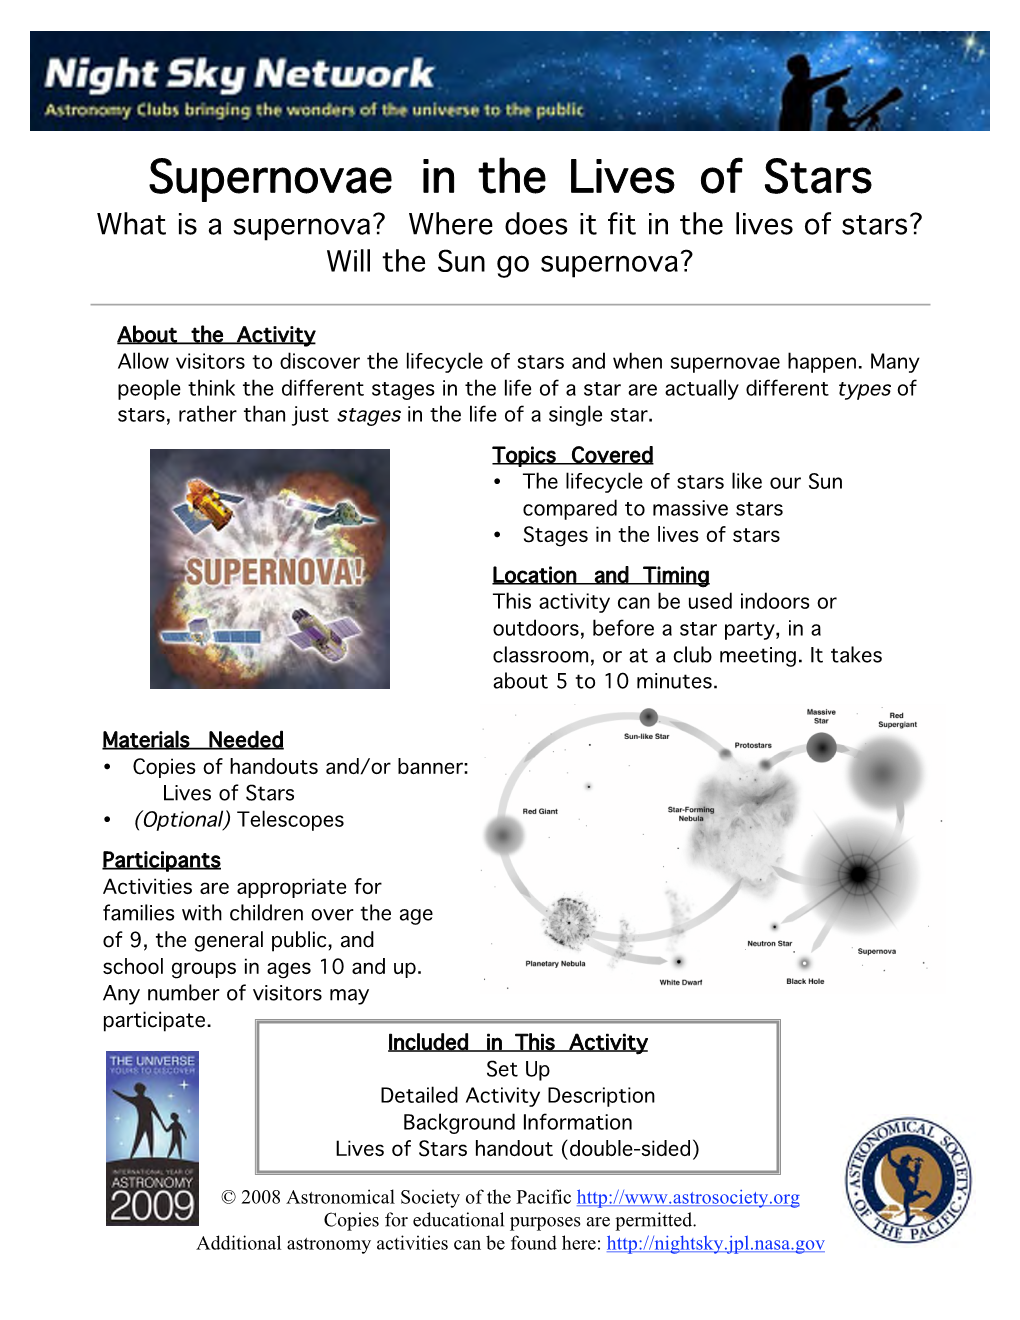 Supernovae in the Lives of Stars What Is a Supernova? Where Does It Fit in the Lives of Stars? Will the Sun Go Supernova?